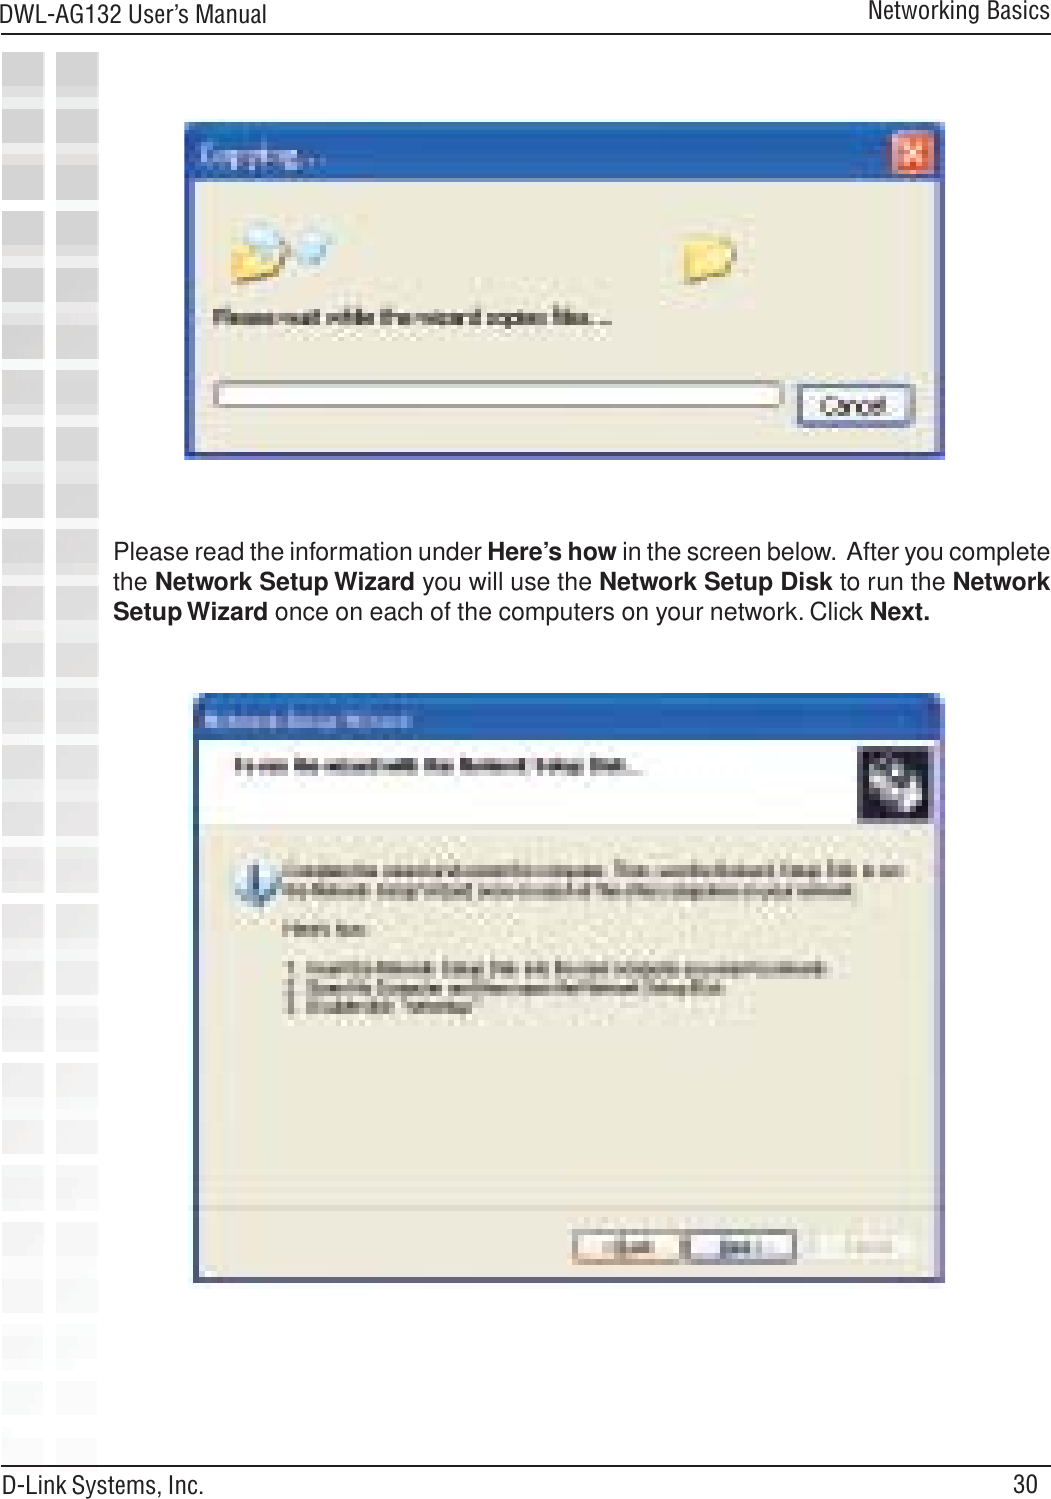 30DWL-AG132 User’s ManualD-Link Systems, Inc.Networking BasicsPlease read the information under Here’s how in the screen below.  After you completethe Network Setup Wizard you will use the Network Setup Disk to run the NetworkSetup Wizard once on each of the computers on your network. Click Next.